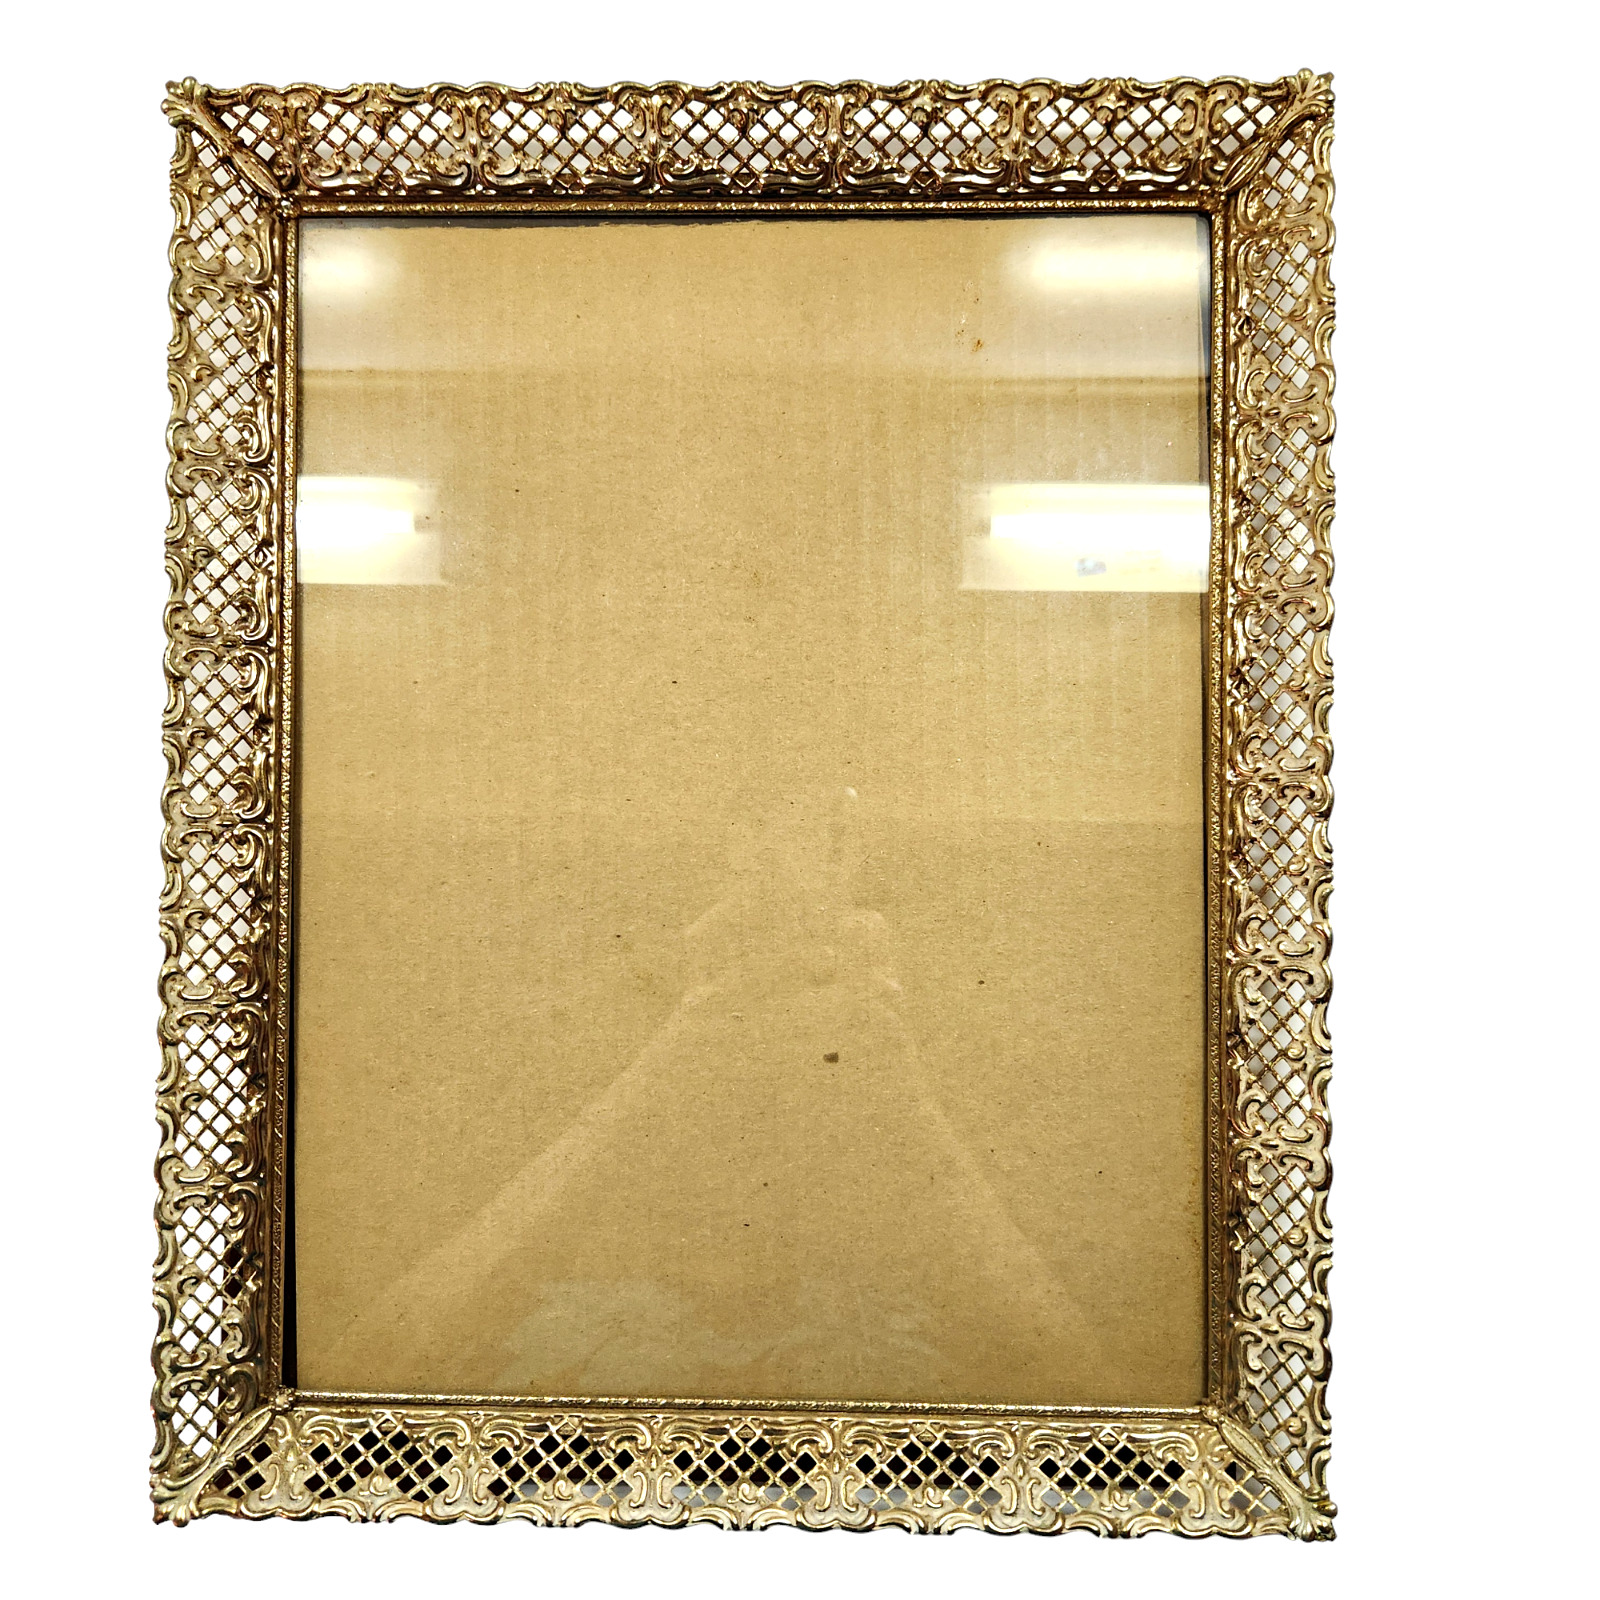 Vintage Floral Filigree Gold & Cream Metal 11x14 Photo Picture Frame Hang Stand